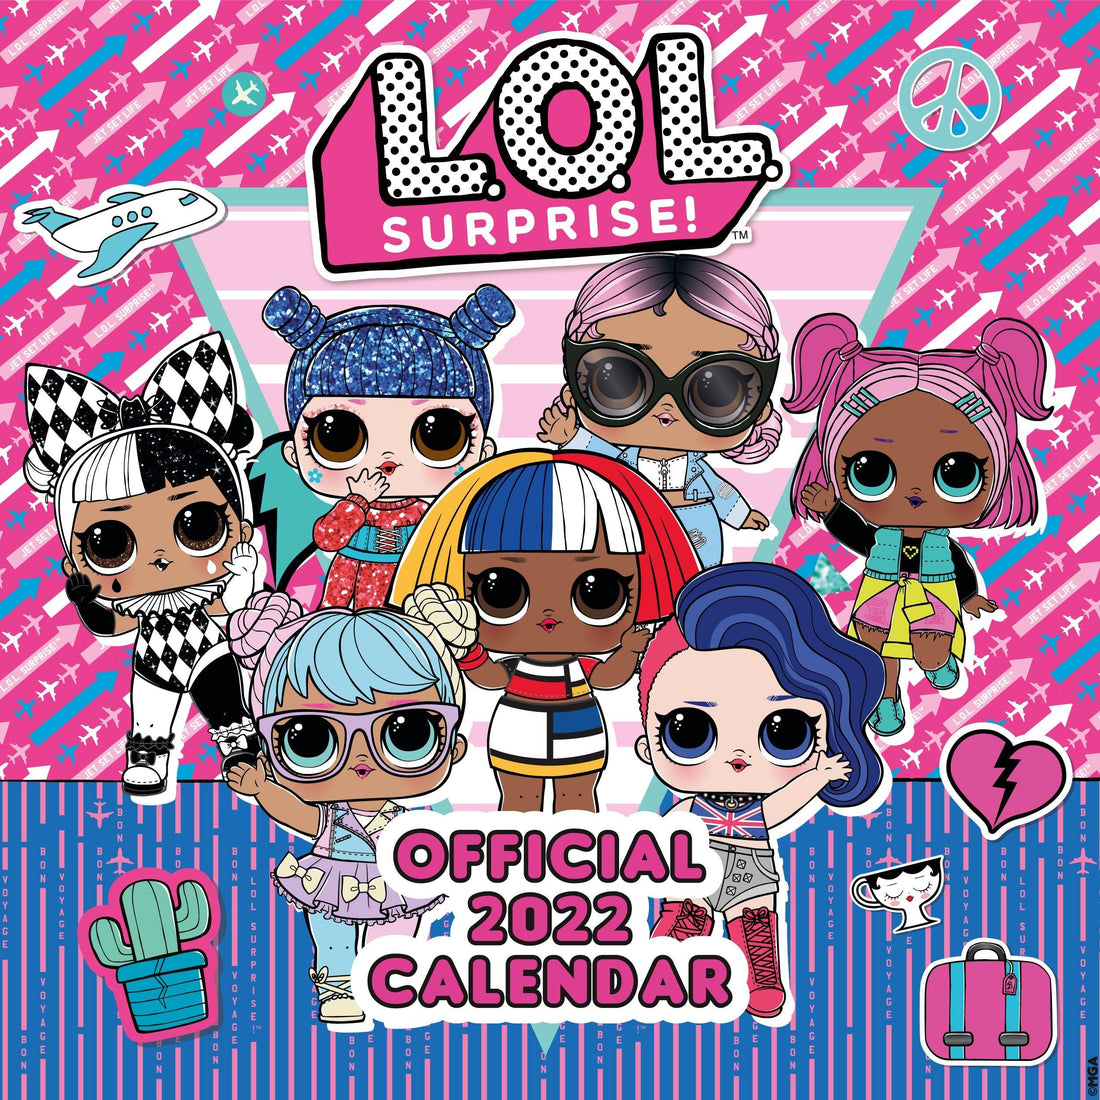 L.O.L SURPRISE! MOVIE IS HERE! by Danilo Promotions